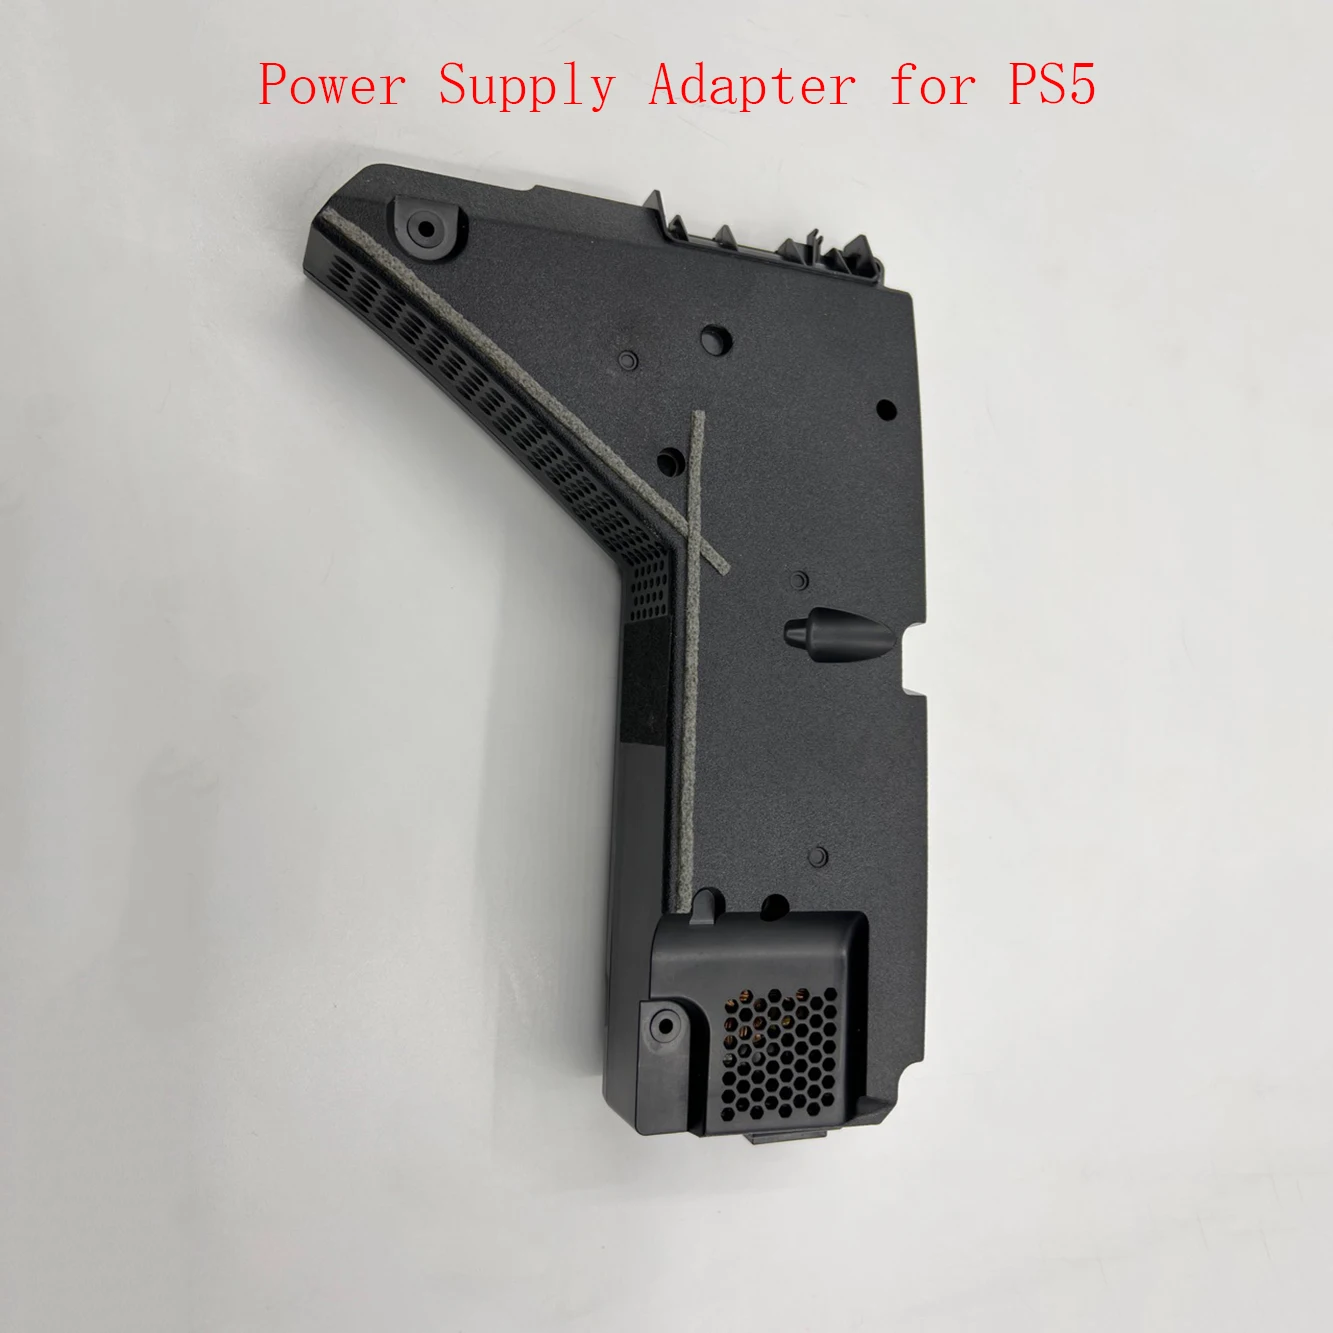 Power Supply Adapter for PS5 Multifunction Replacement Power Supply Unit for PS5 Console ADP‑400DR 100-127V 200-240V